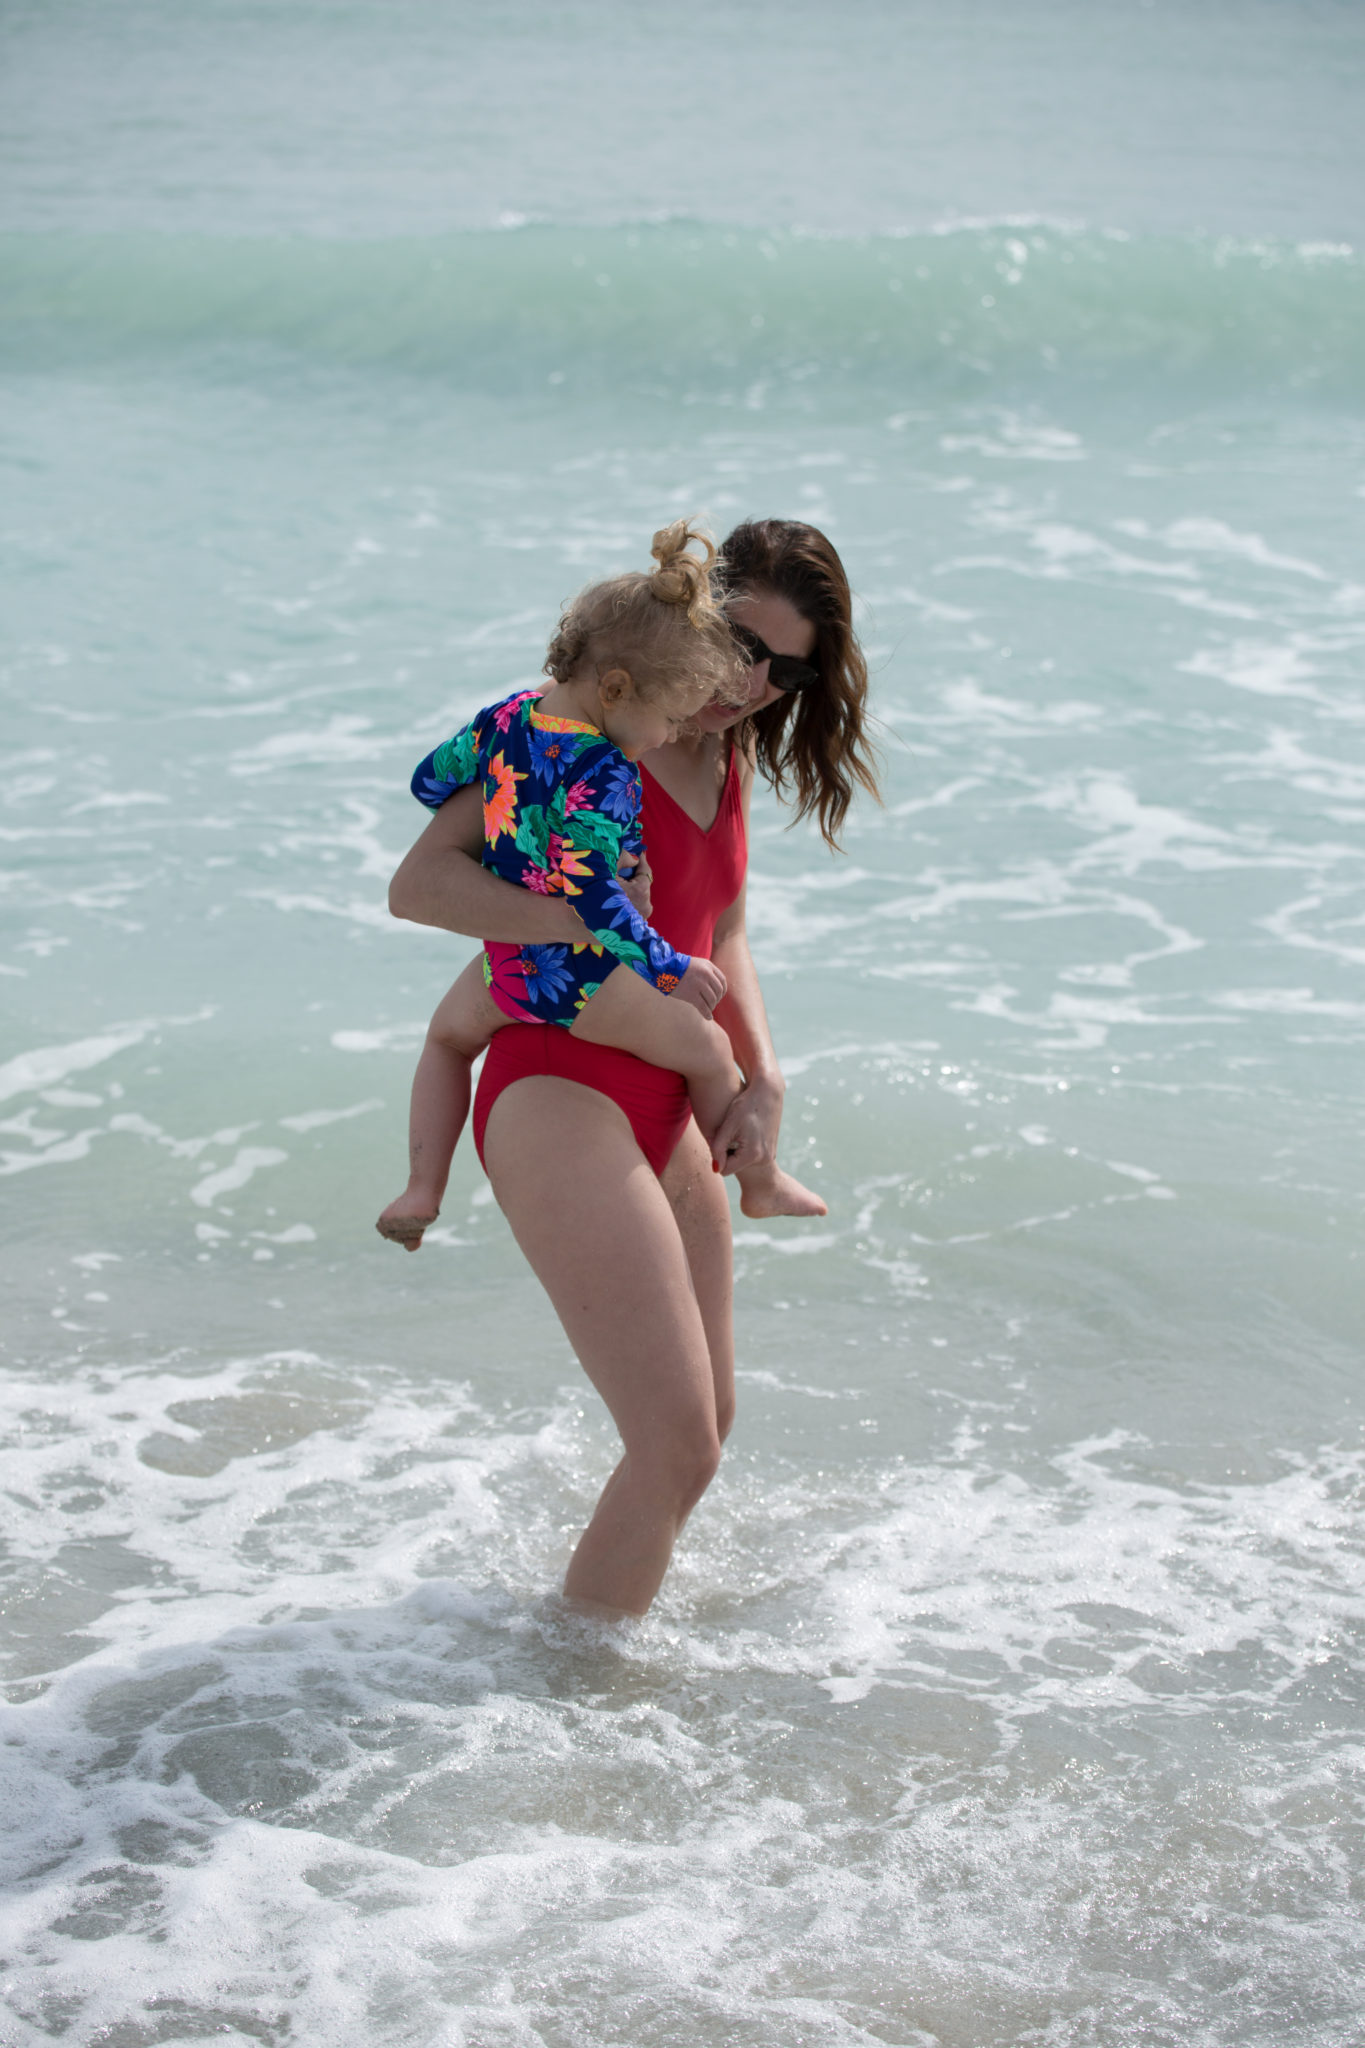 what to do and where to stay in delray beach florida | summer toddler style | summer style | beach style | west palm beach flordia | seagate hotel delray beach florida | family vacation with a toddler